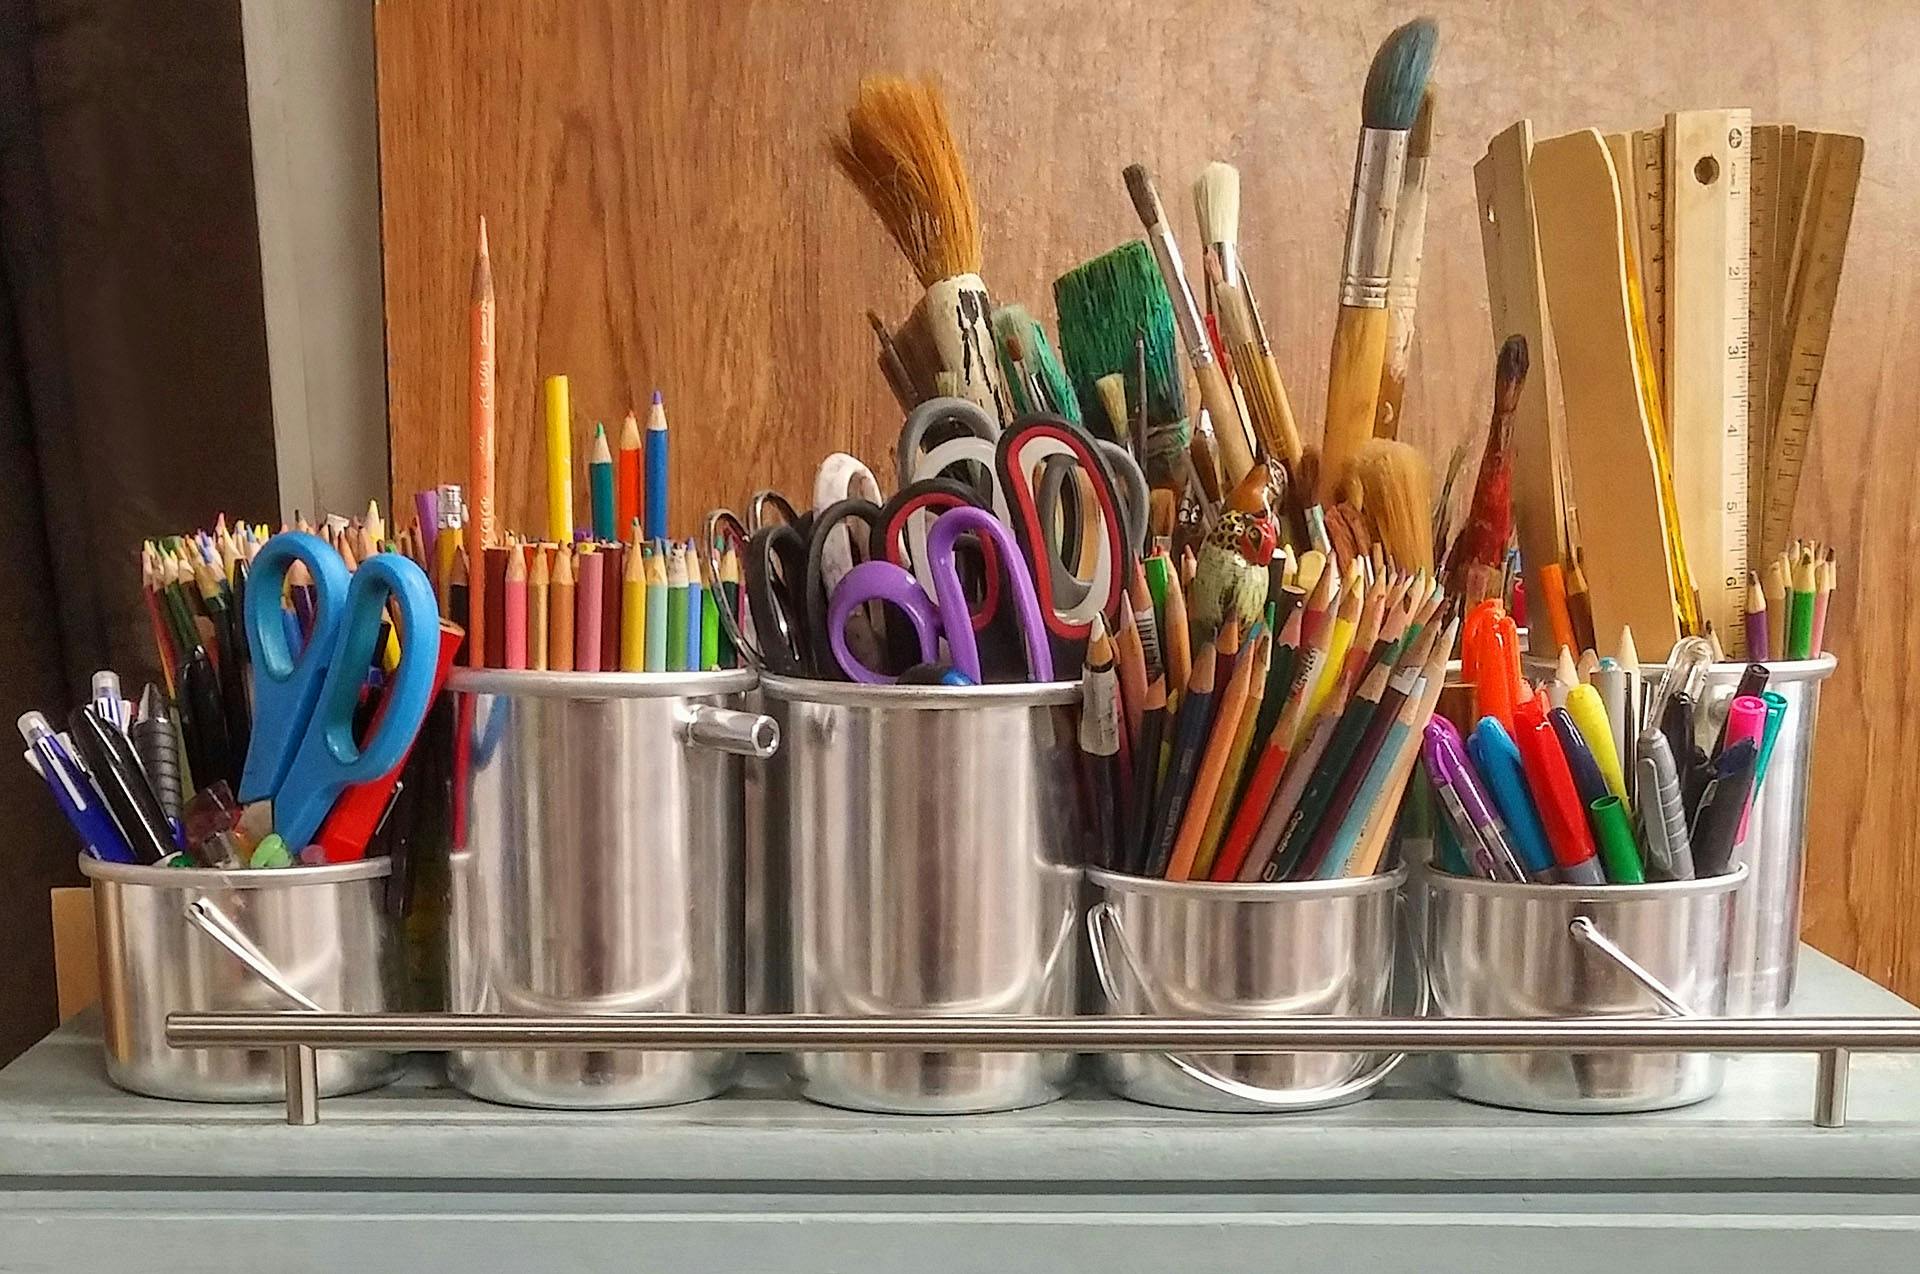 Five stainless stell pencil pots full of coloured pencils, paint brushes, rulars and crayons.